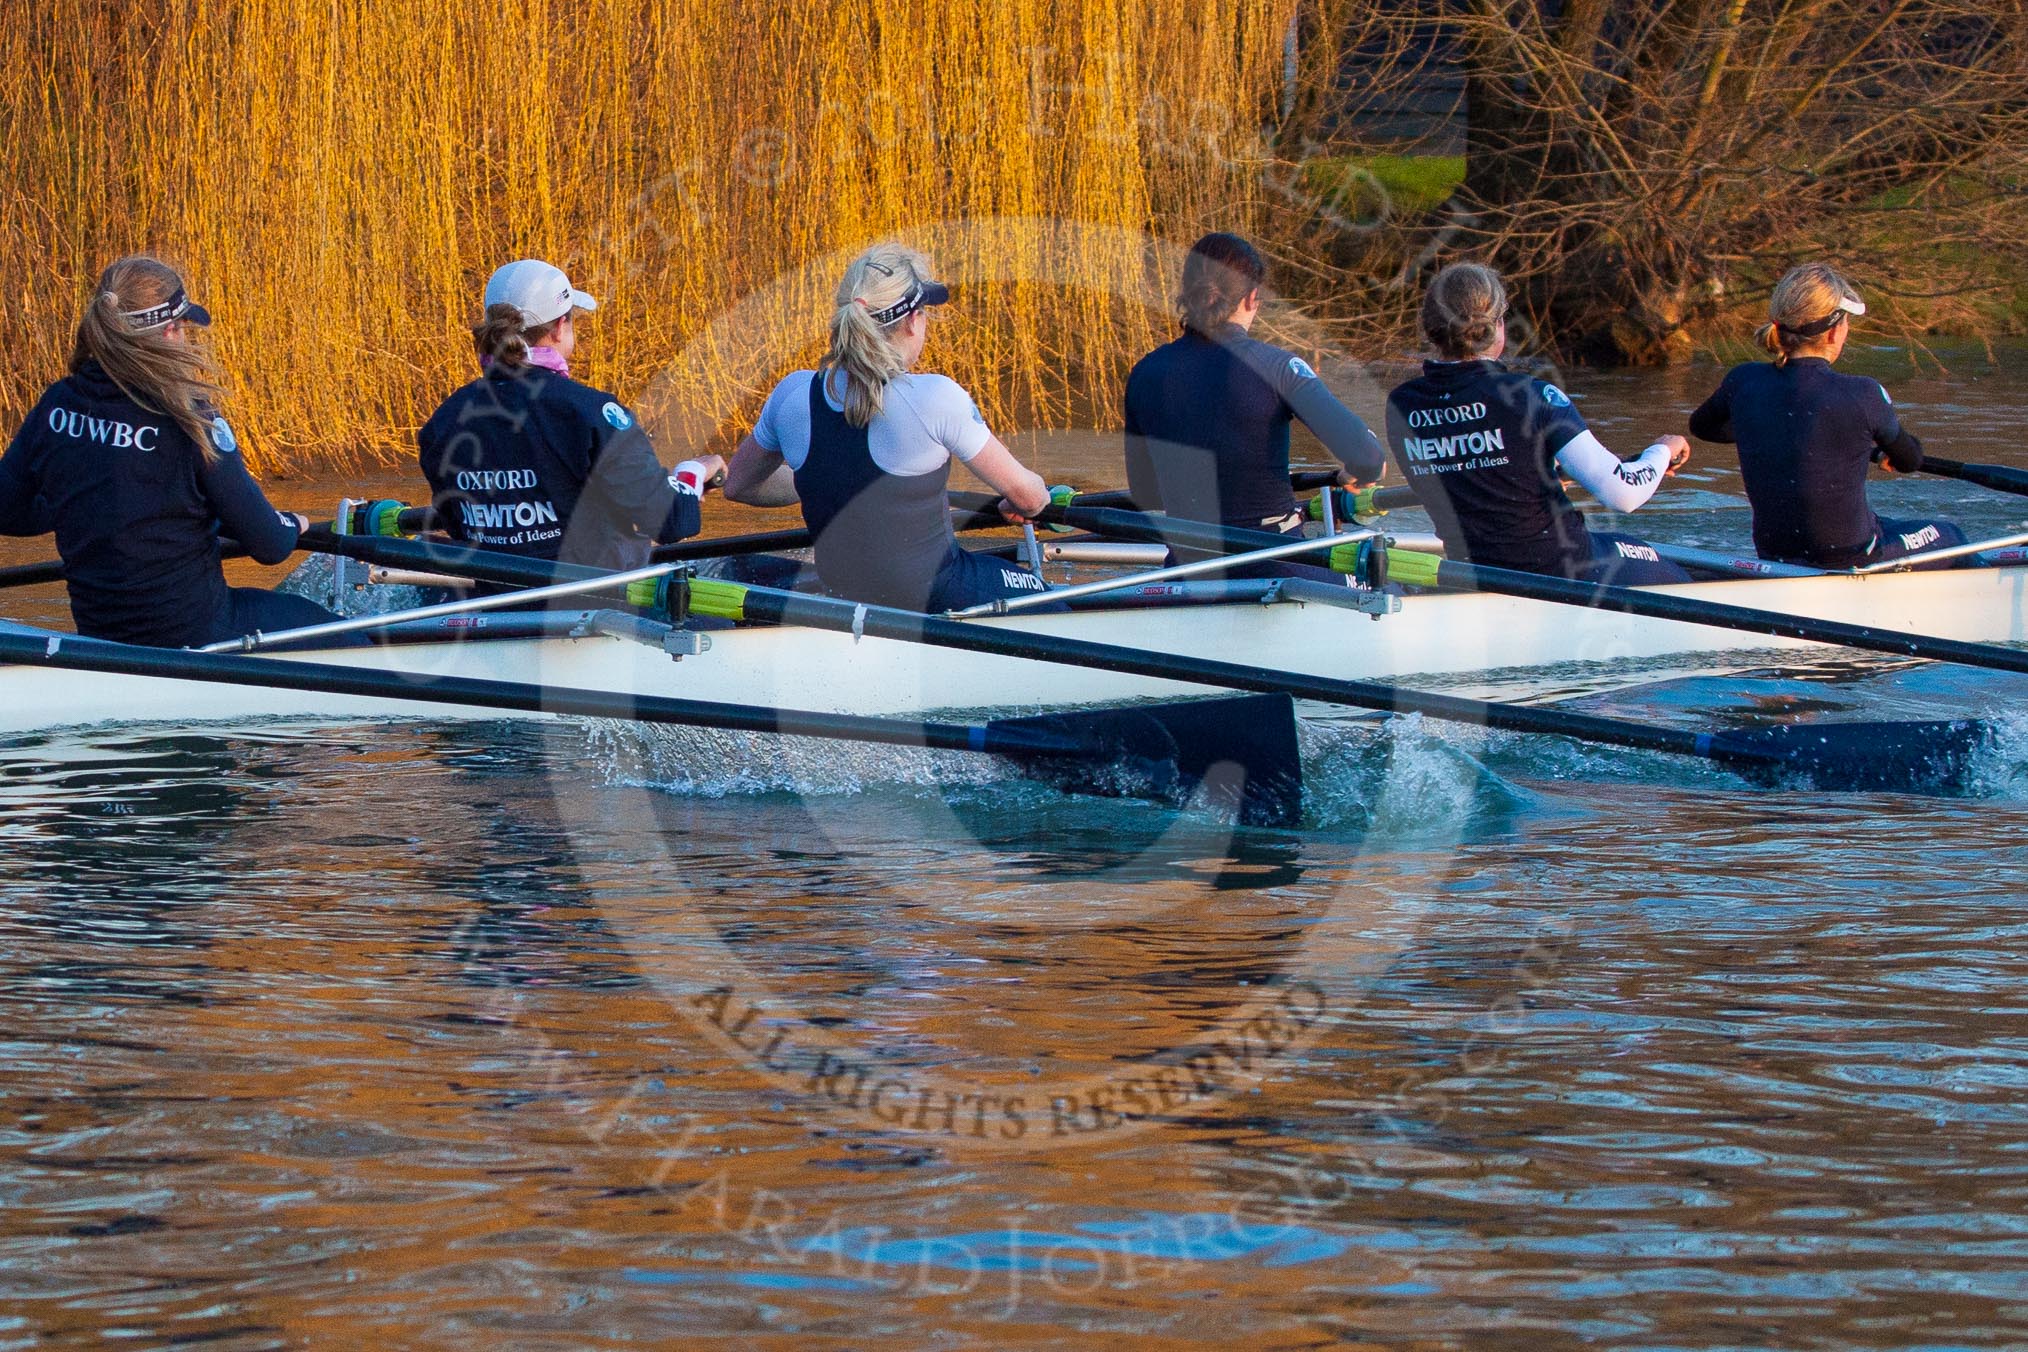 The Boat Race season 2013 - OUWBC training: In the OUWBC Blue Boat 3 seat Mary Foord-Weston, Jo Lee, Amy Varney, Harriet Keane, Anastasia Chitty, and stroke Maxie Scheske..
River Thames,
Wallingford,
Oxfordshire,
United Kingdom,
on 13 March 2013 at 17:37, image #176